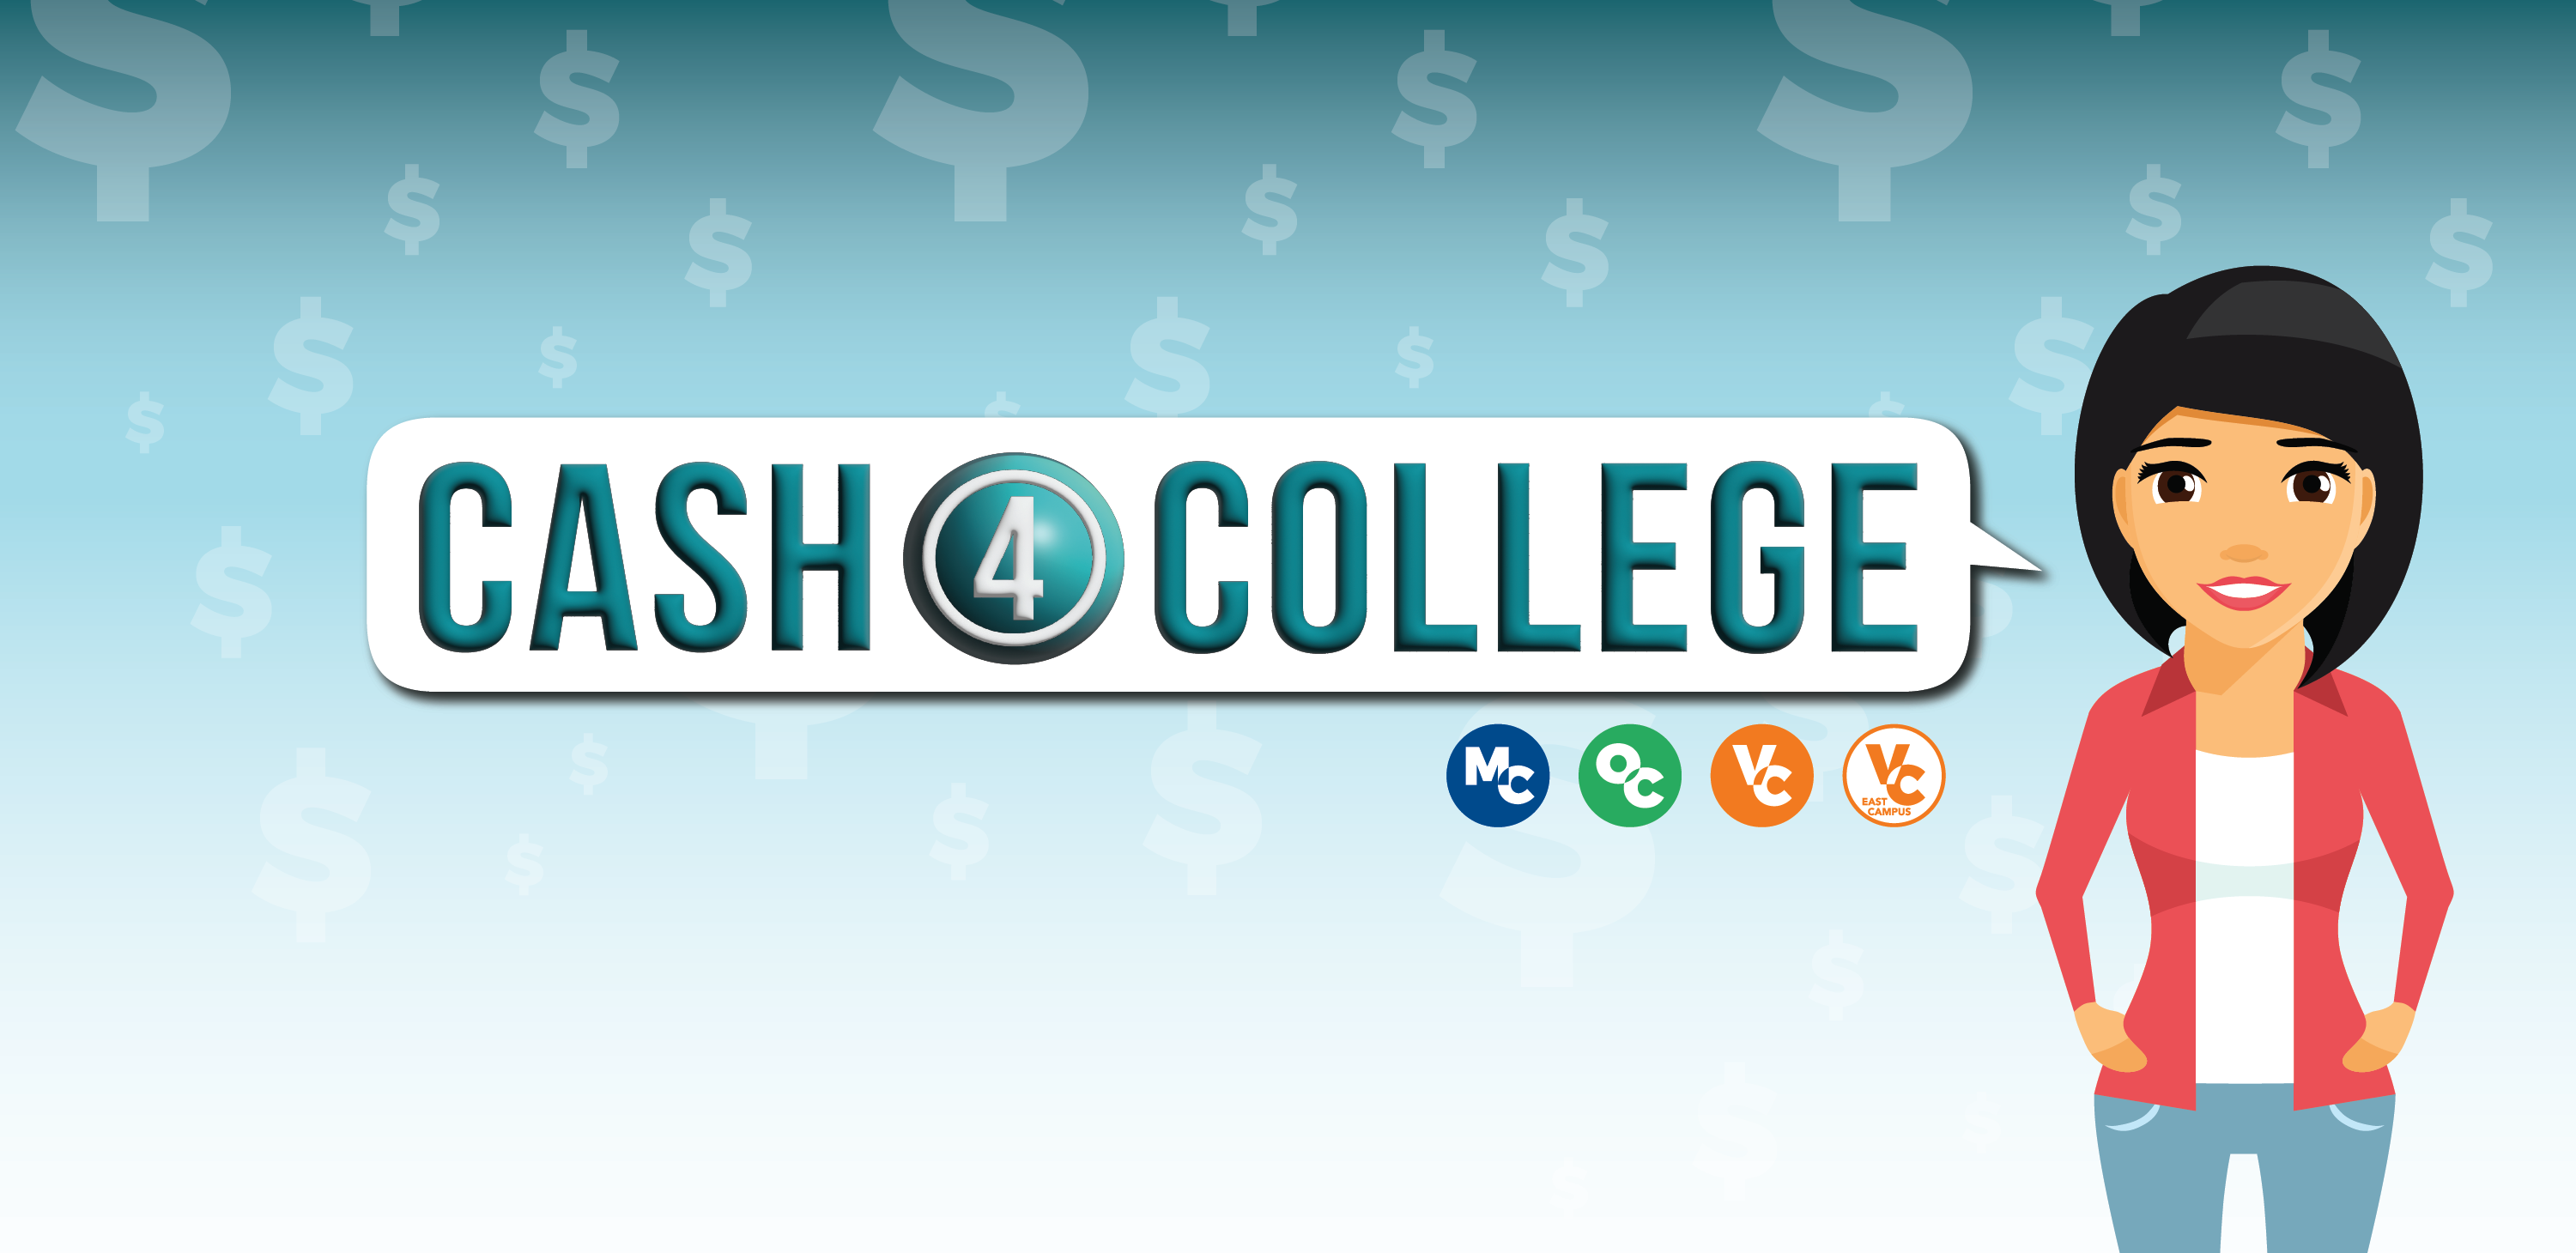 Cash for college